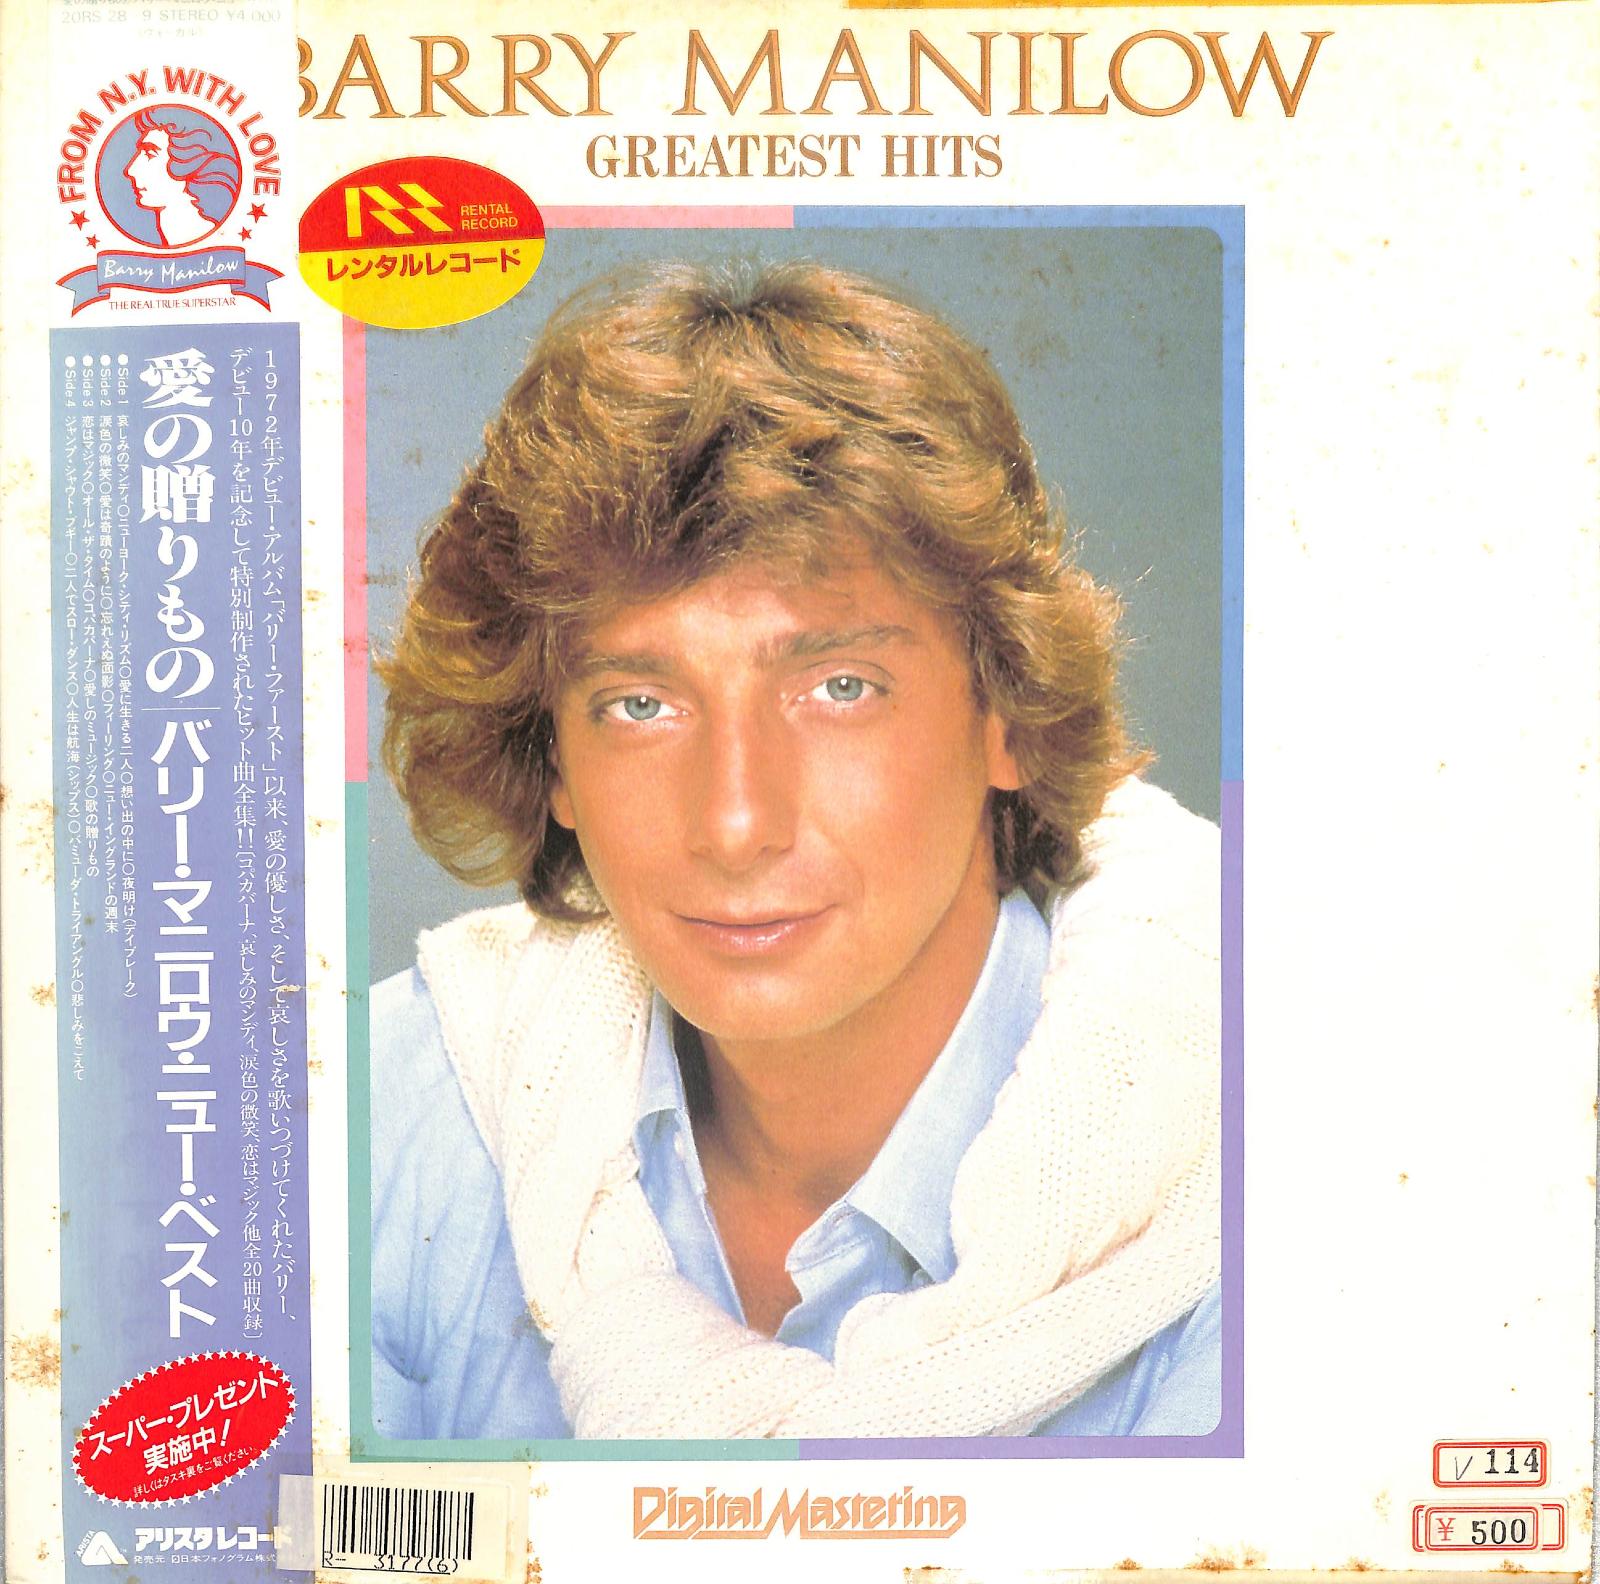 BARRY MANILOW - Greatest Hits